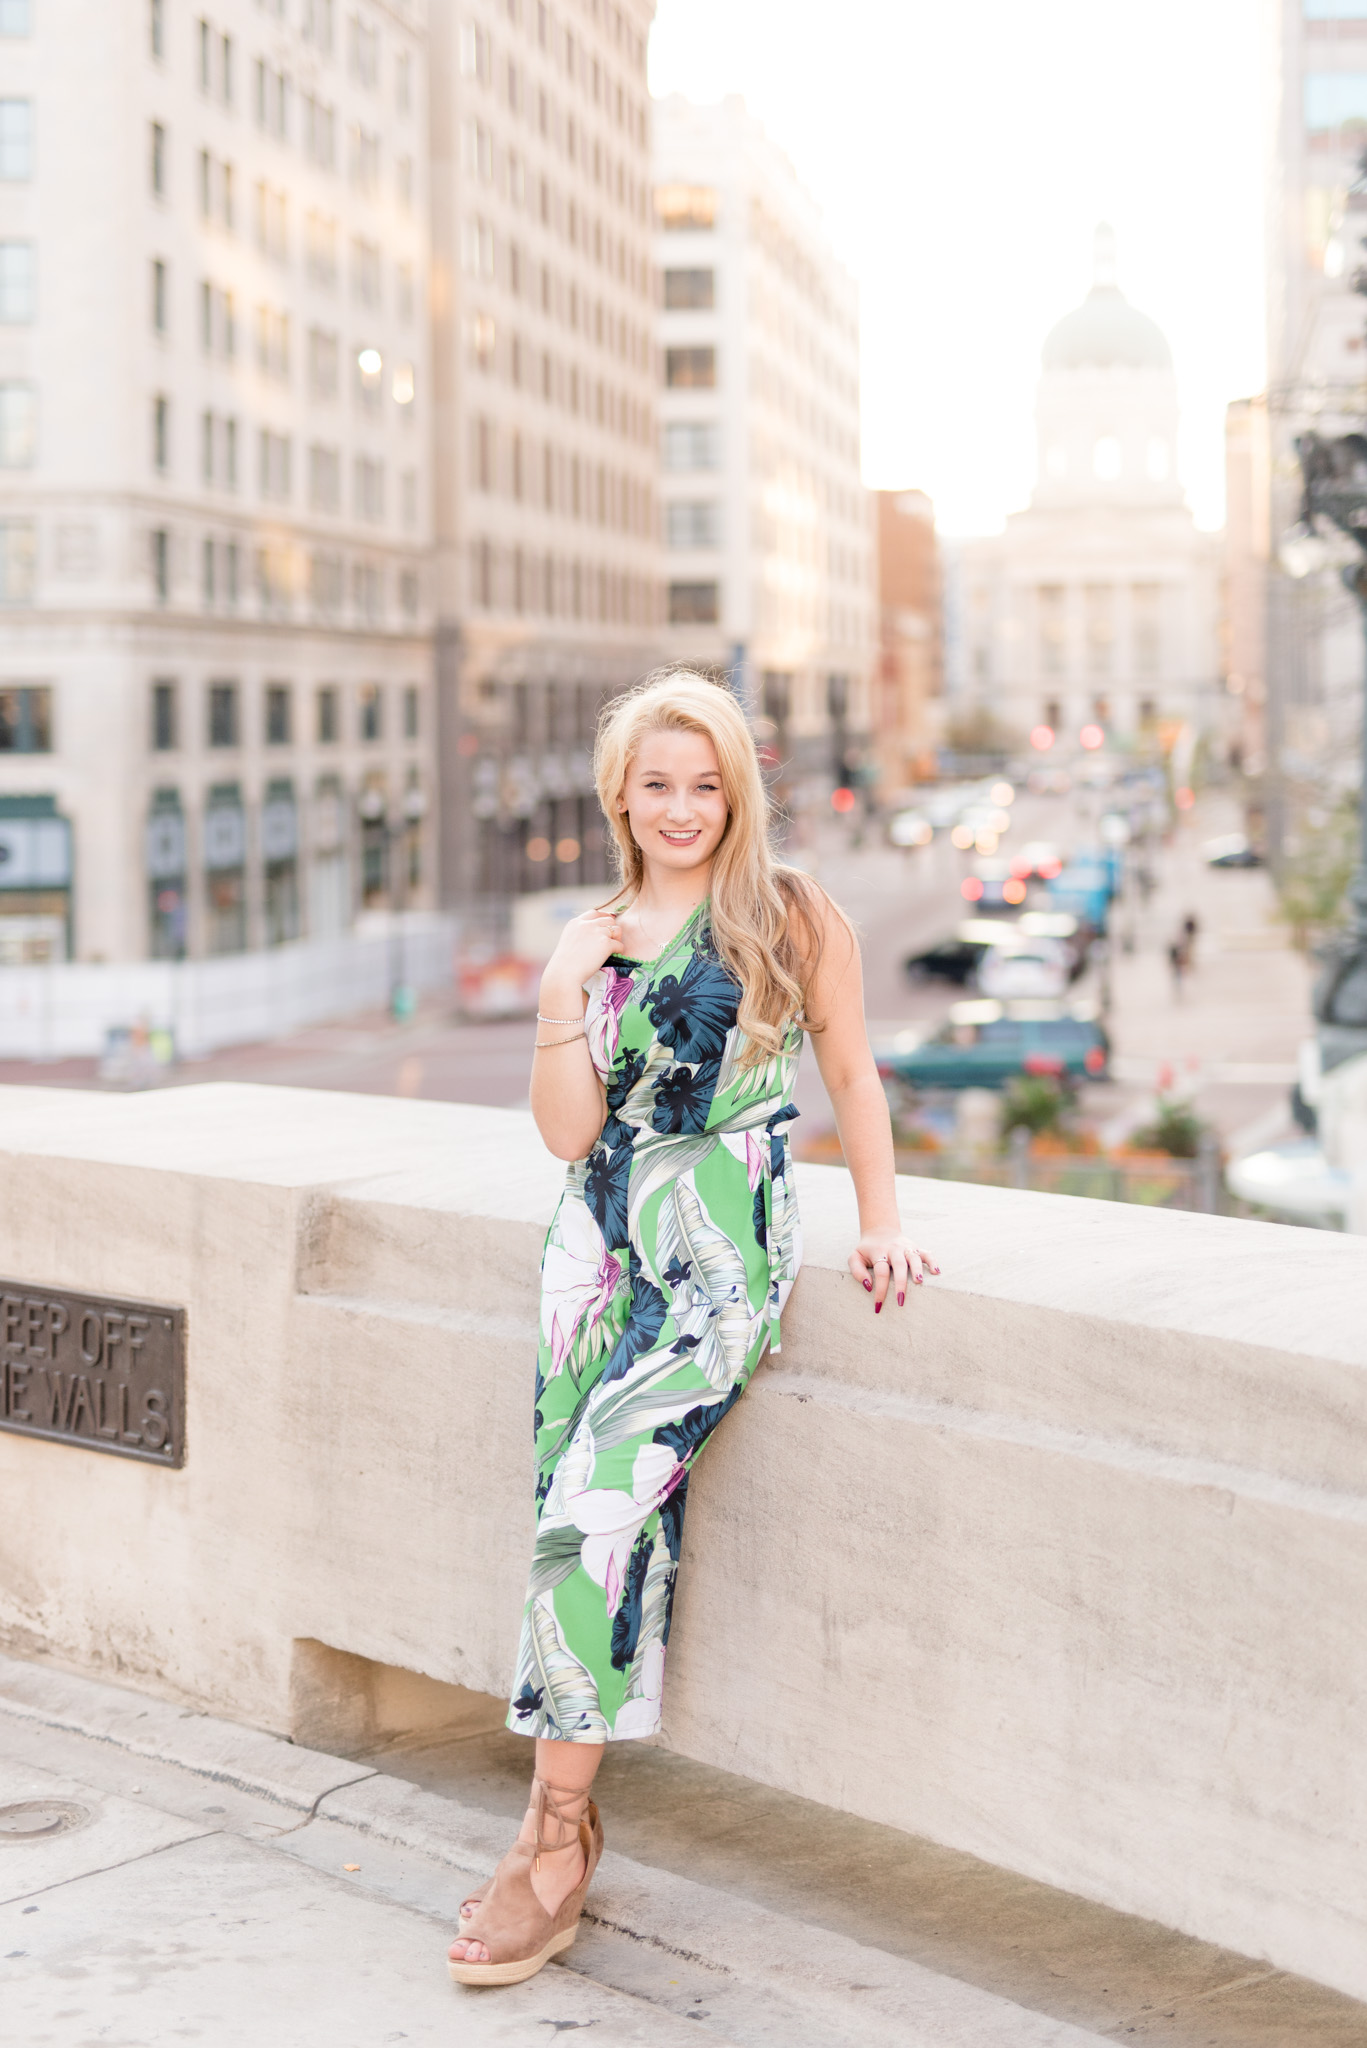 Senior leans against wall in downtown Indianapolis at sunset.